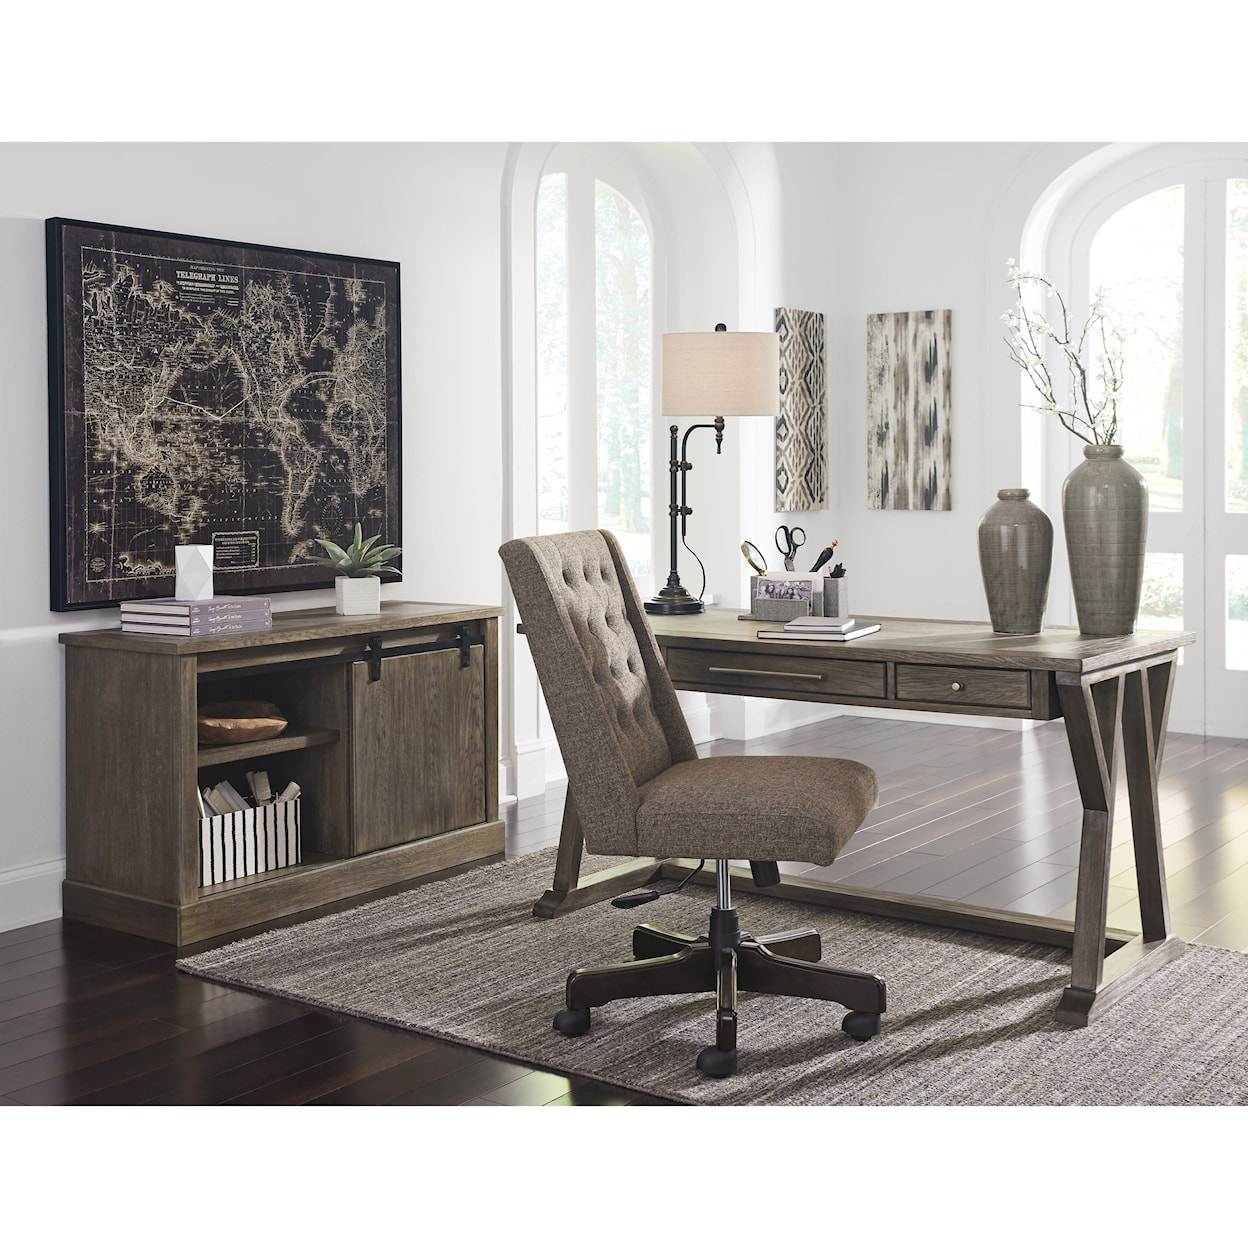 Signature Design by Ashley Luxenford Home Office Large Leg Desk